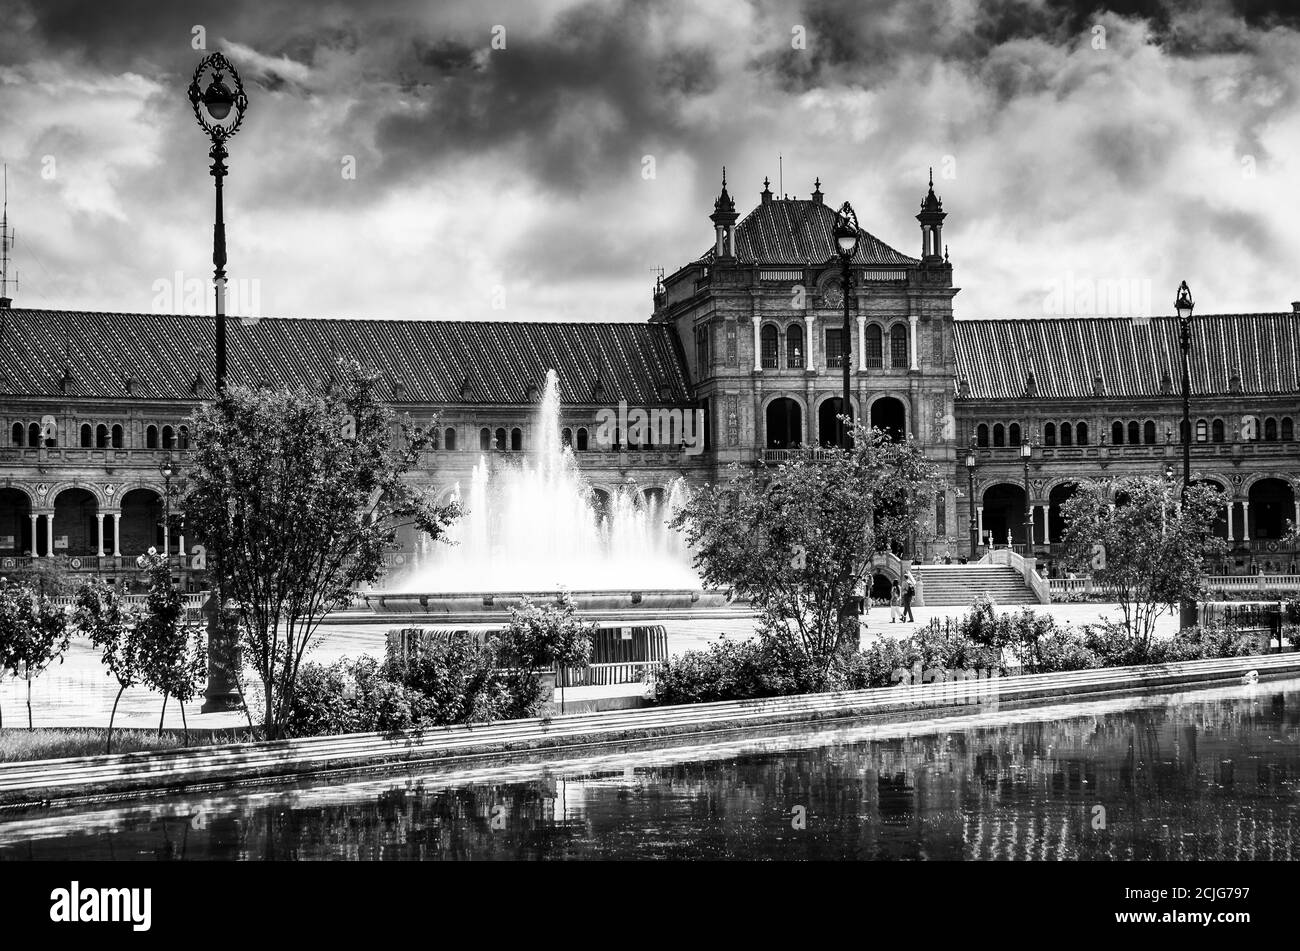 SEVILLA, SPAIN - JUNE Circa, 2020. wide angle Panorama of the Spain Square Plaza de Espana in Seville, with bridges over the canal, lake, fountain, to Stock Photo